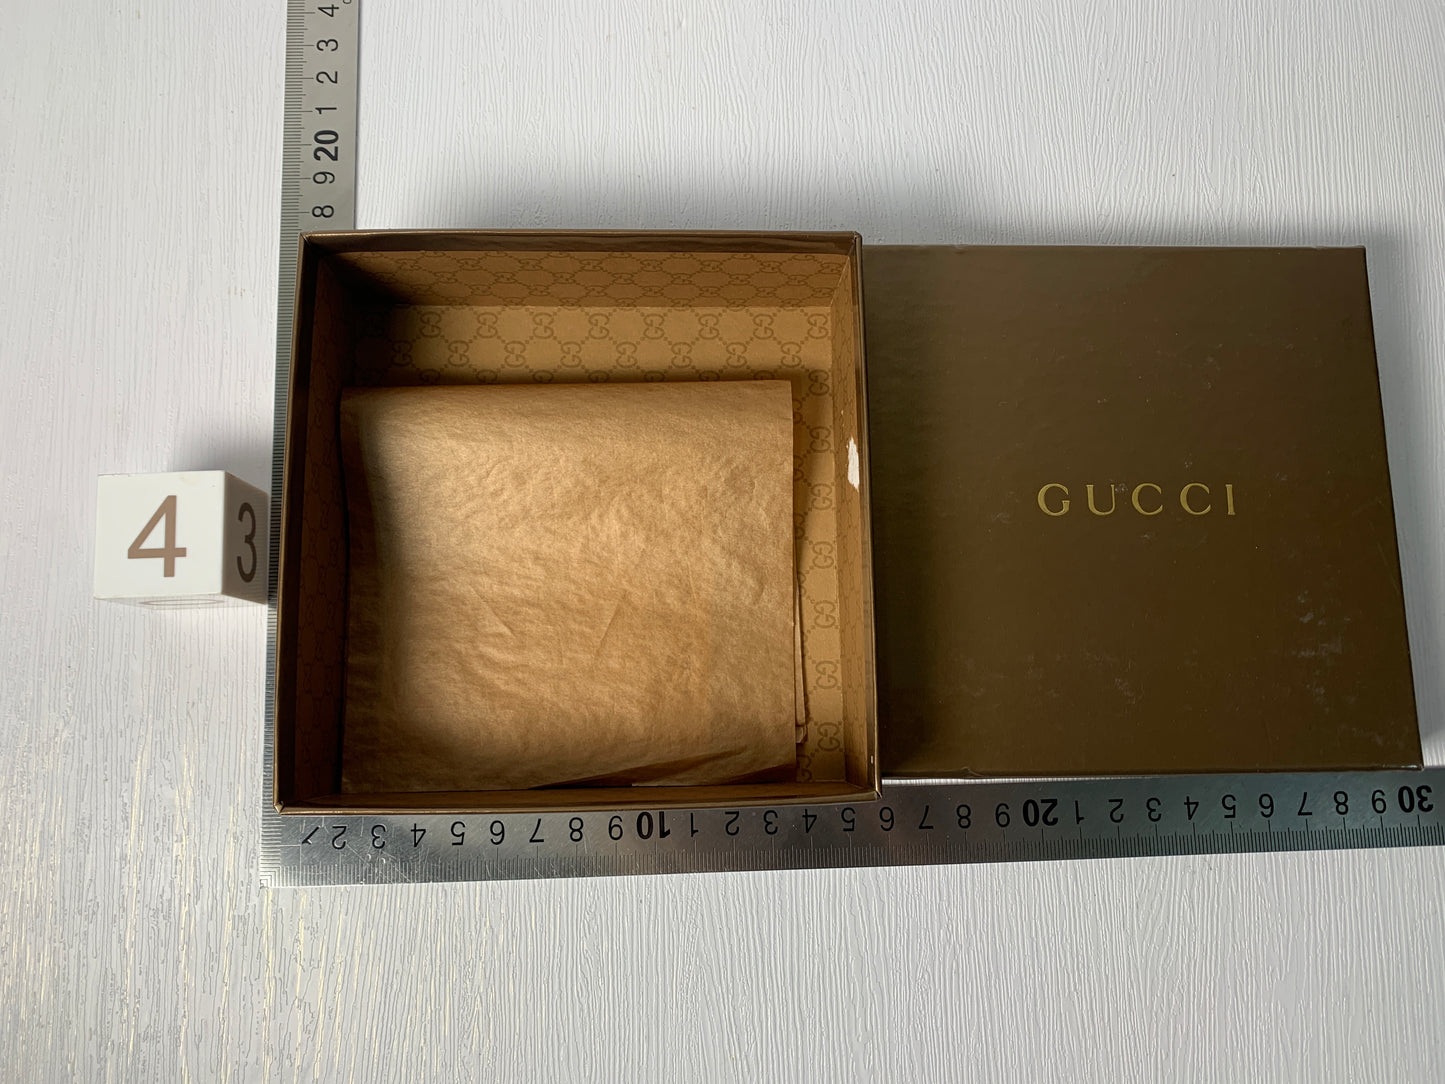 Auth Gucci Box gift for watch wallet jewllery necklace bracelet  - 30JAN1